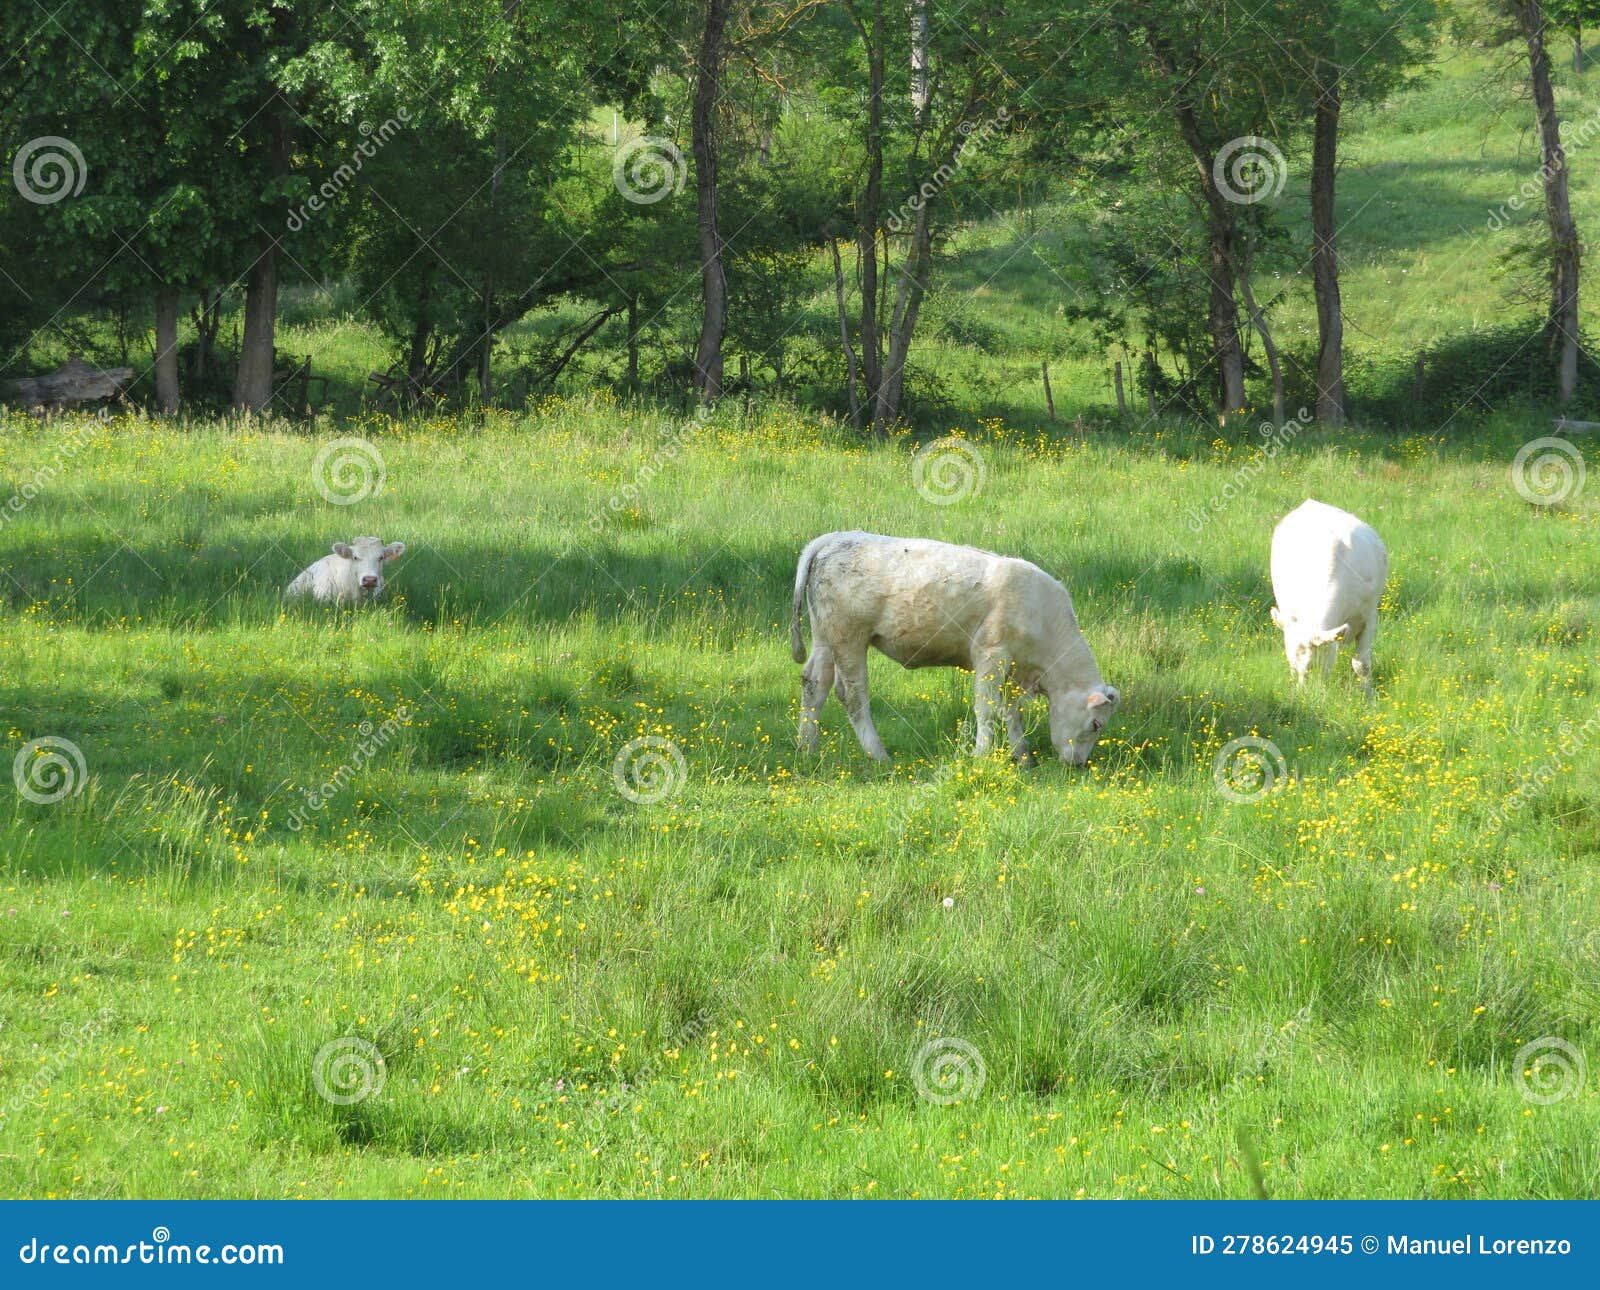 beautiful calves grazing in the meadow quietly happy farm animals